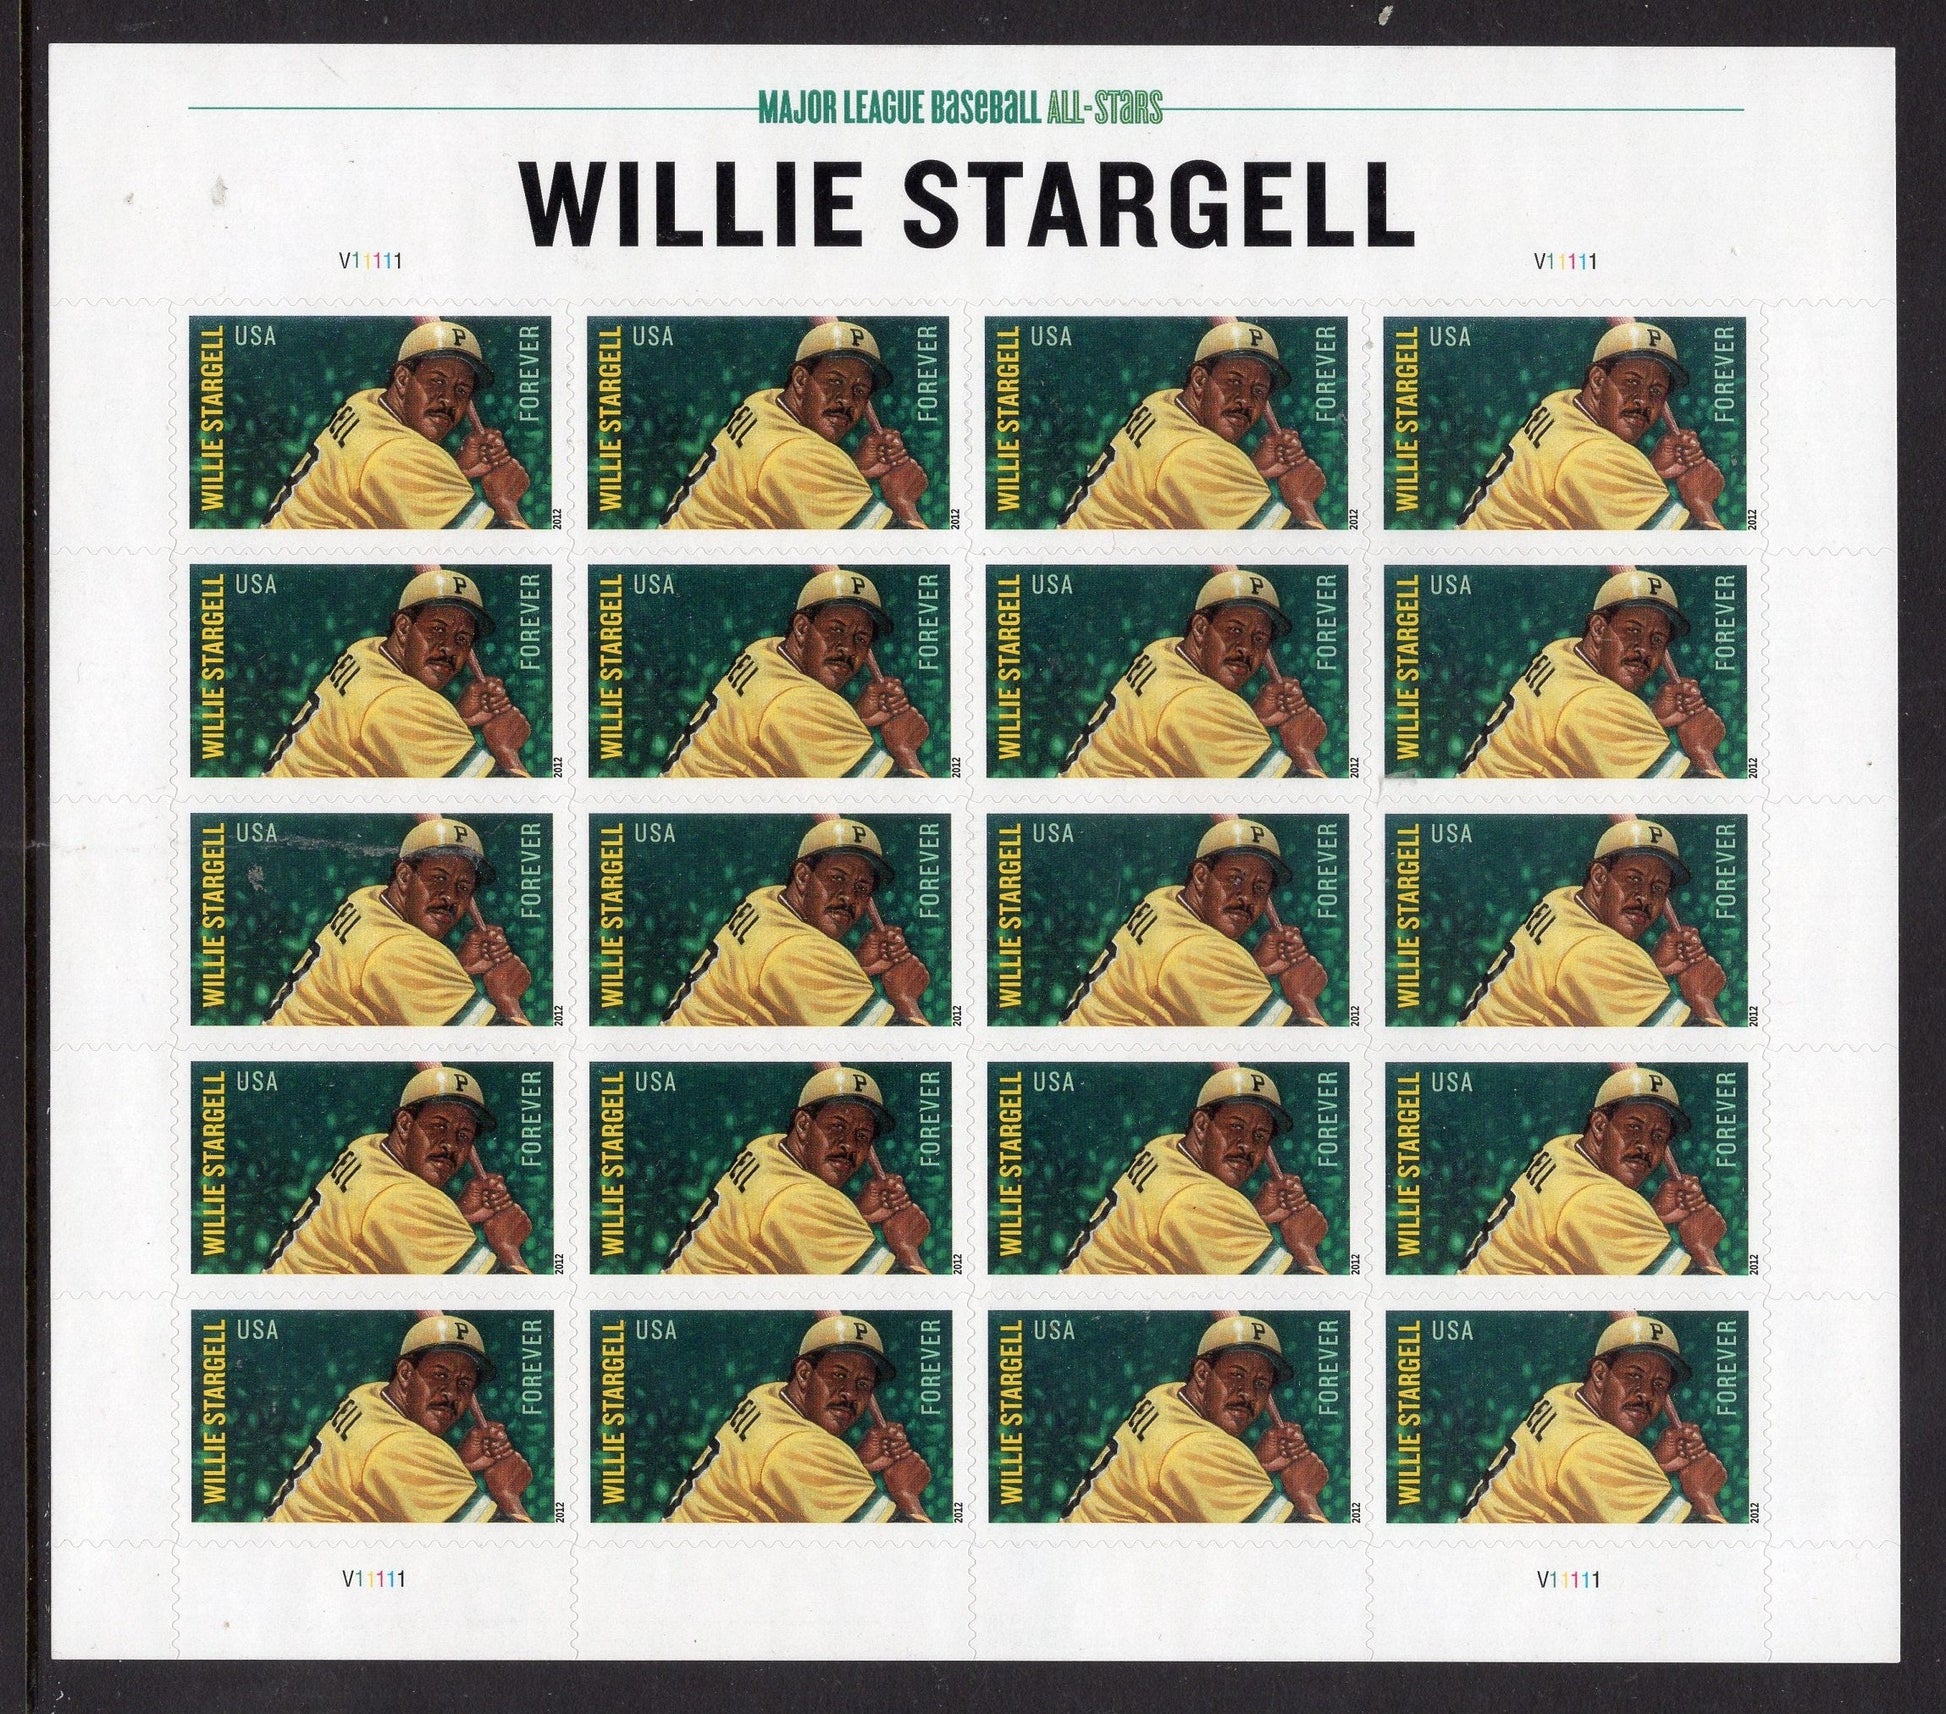 WILLIE STARGELL Sheet of 20 Pittsburgh Pirates Baseball All - sTAR Unused USA Postage Stamps Issued in 2012 - s4696 -